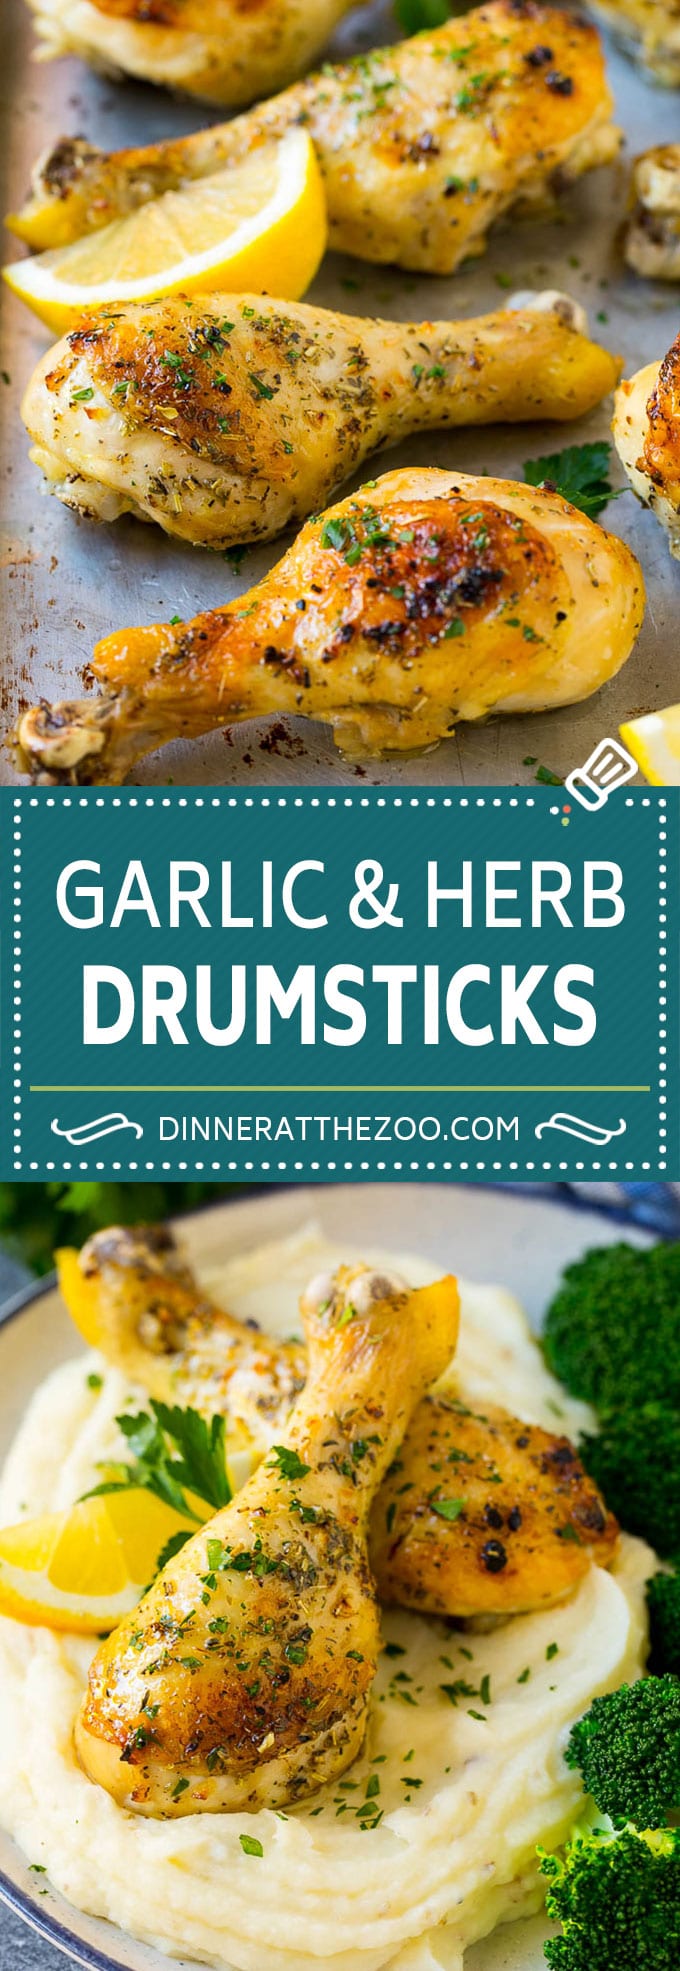 Baked Chicken Drumsticks Recipe | Roasted Chicken Drumsticks | Garlic and Herb Chicken #dinner #chicken #garlic #glutenfree #lowcarb #keto #cleaneating #dinneratthezoo